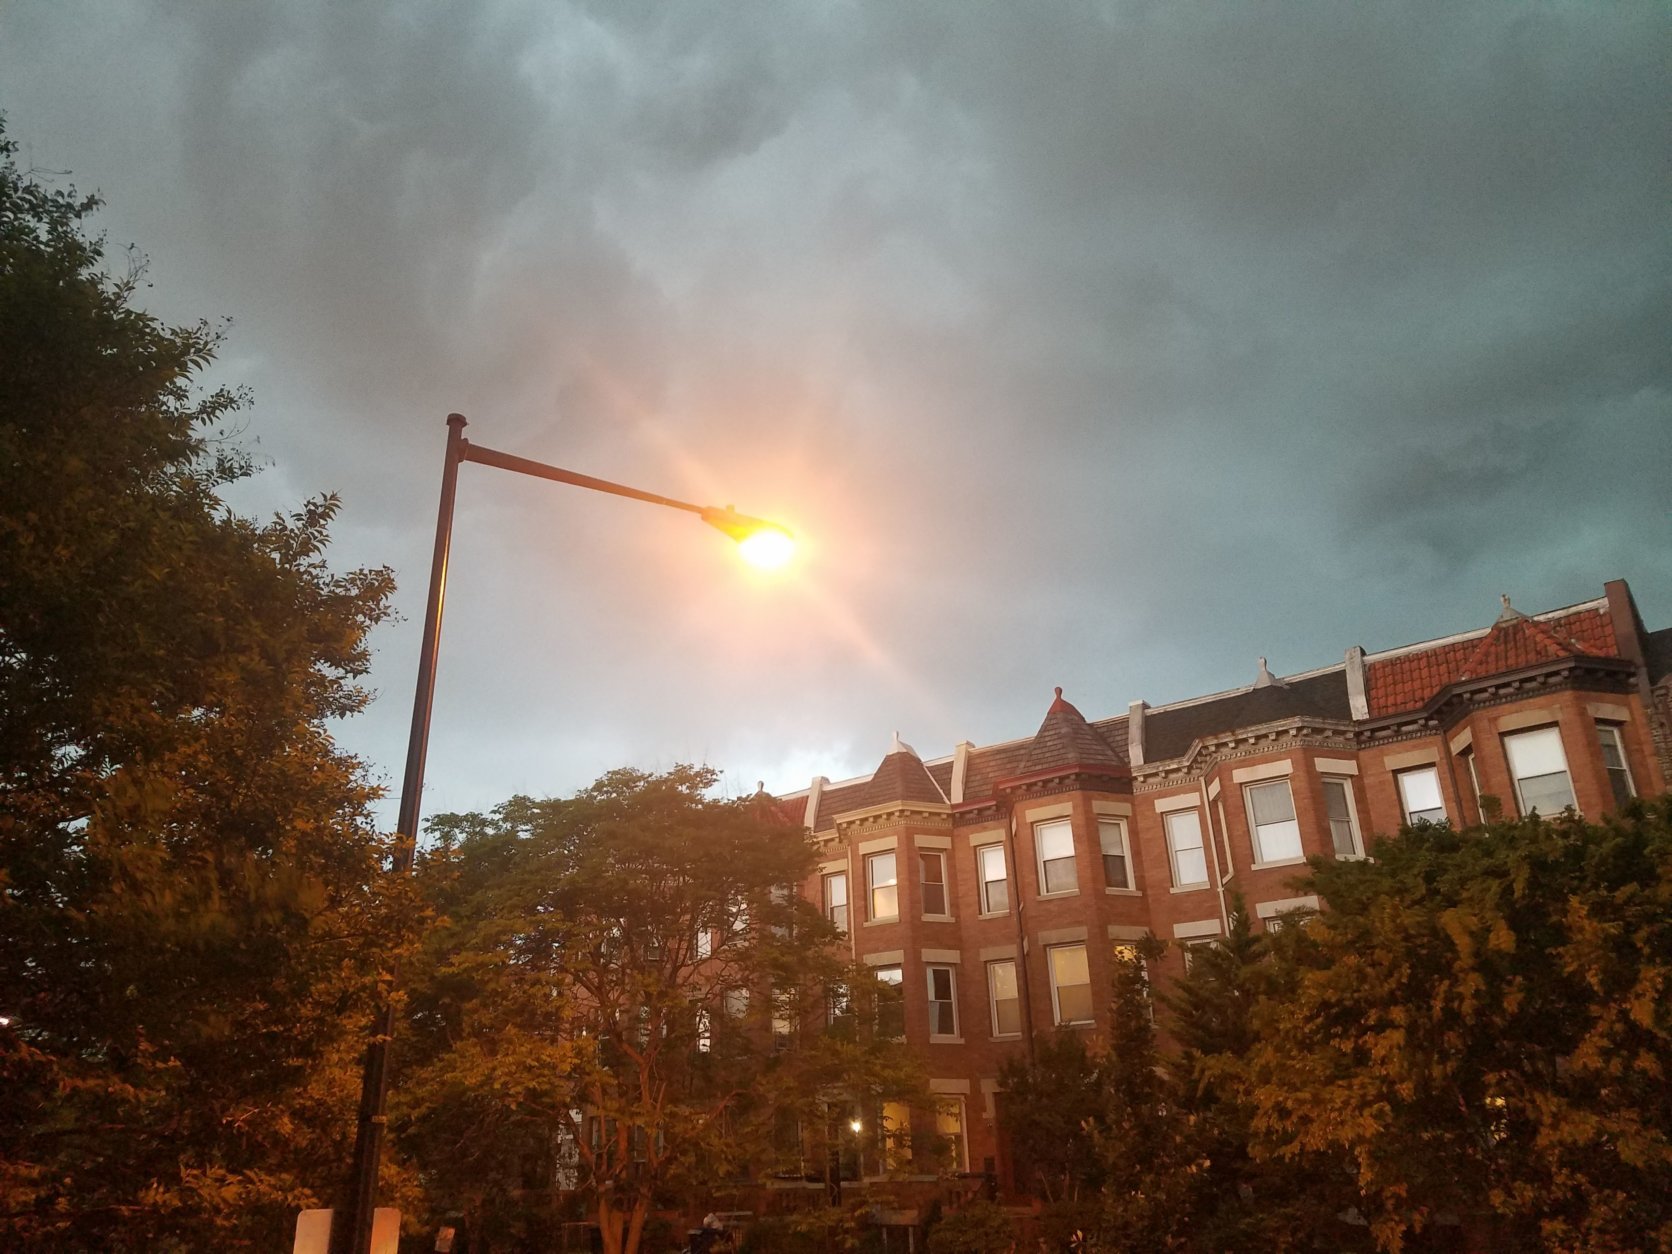 Storm clouds roll over NW Washington, D.C. (WTOP/Will Vitka)